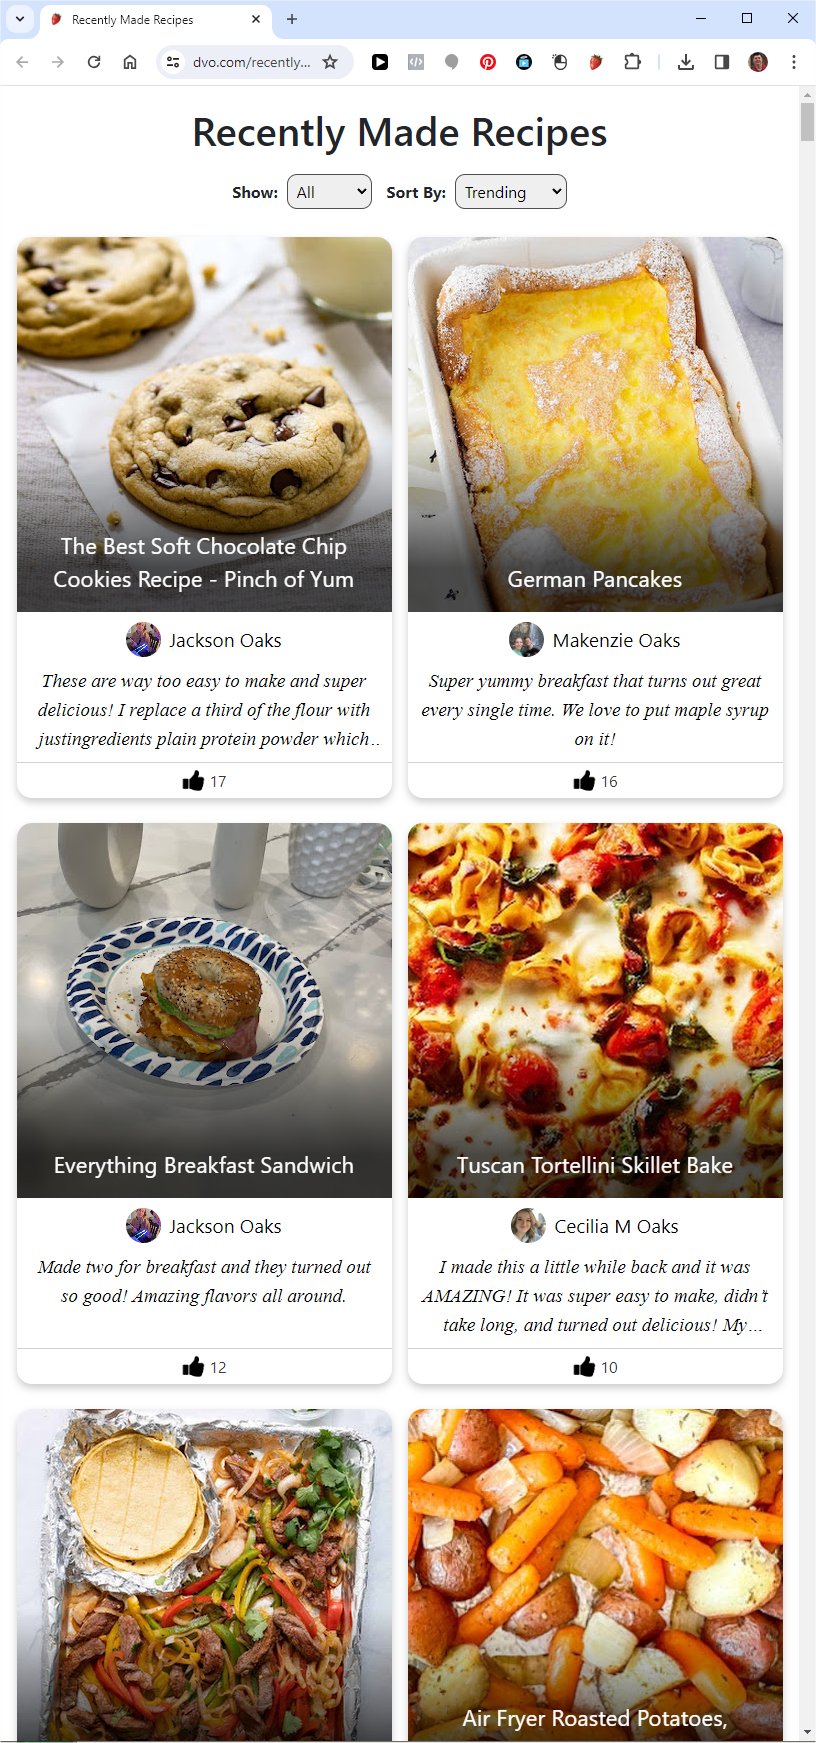 How to see recipes that are Most Liked and Trending!